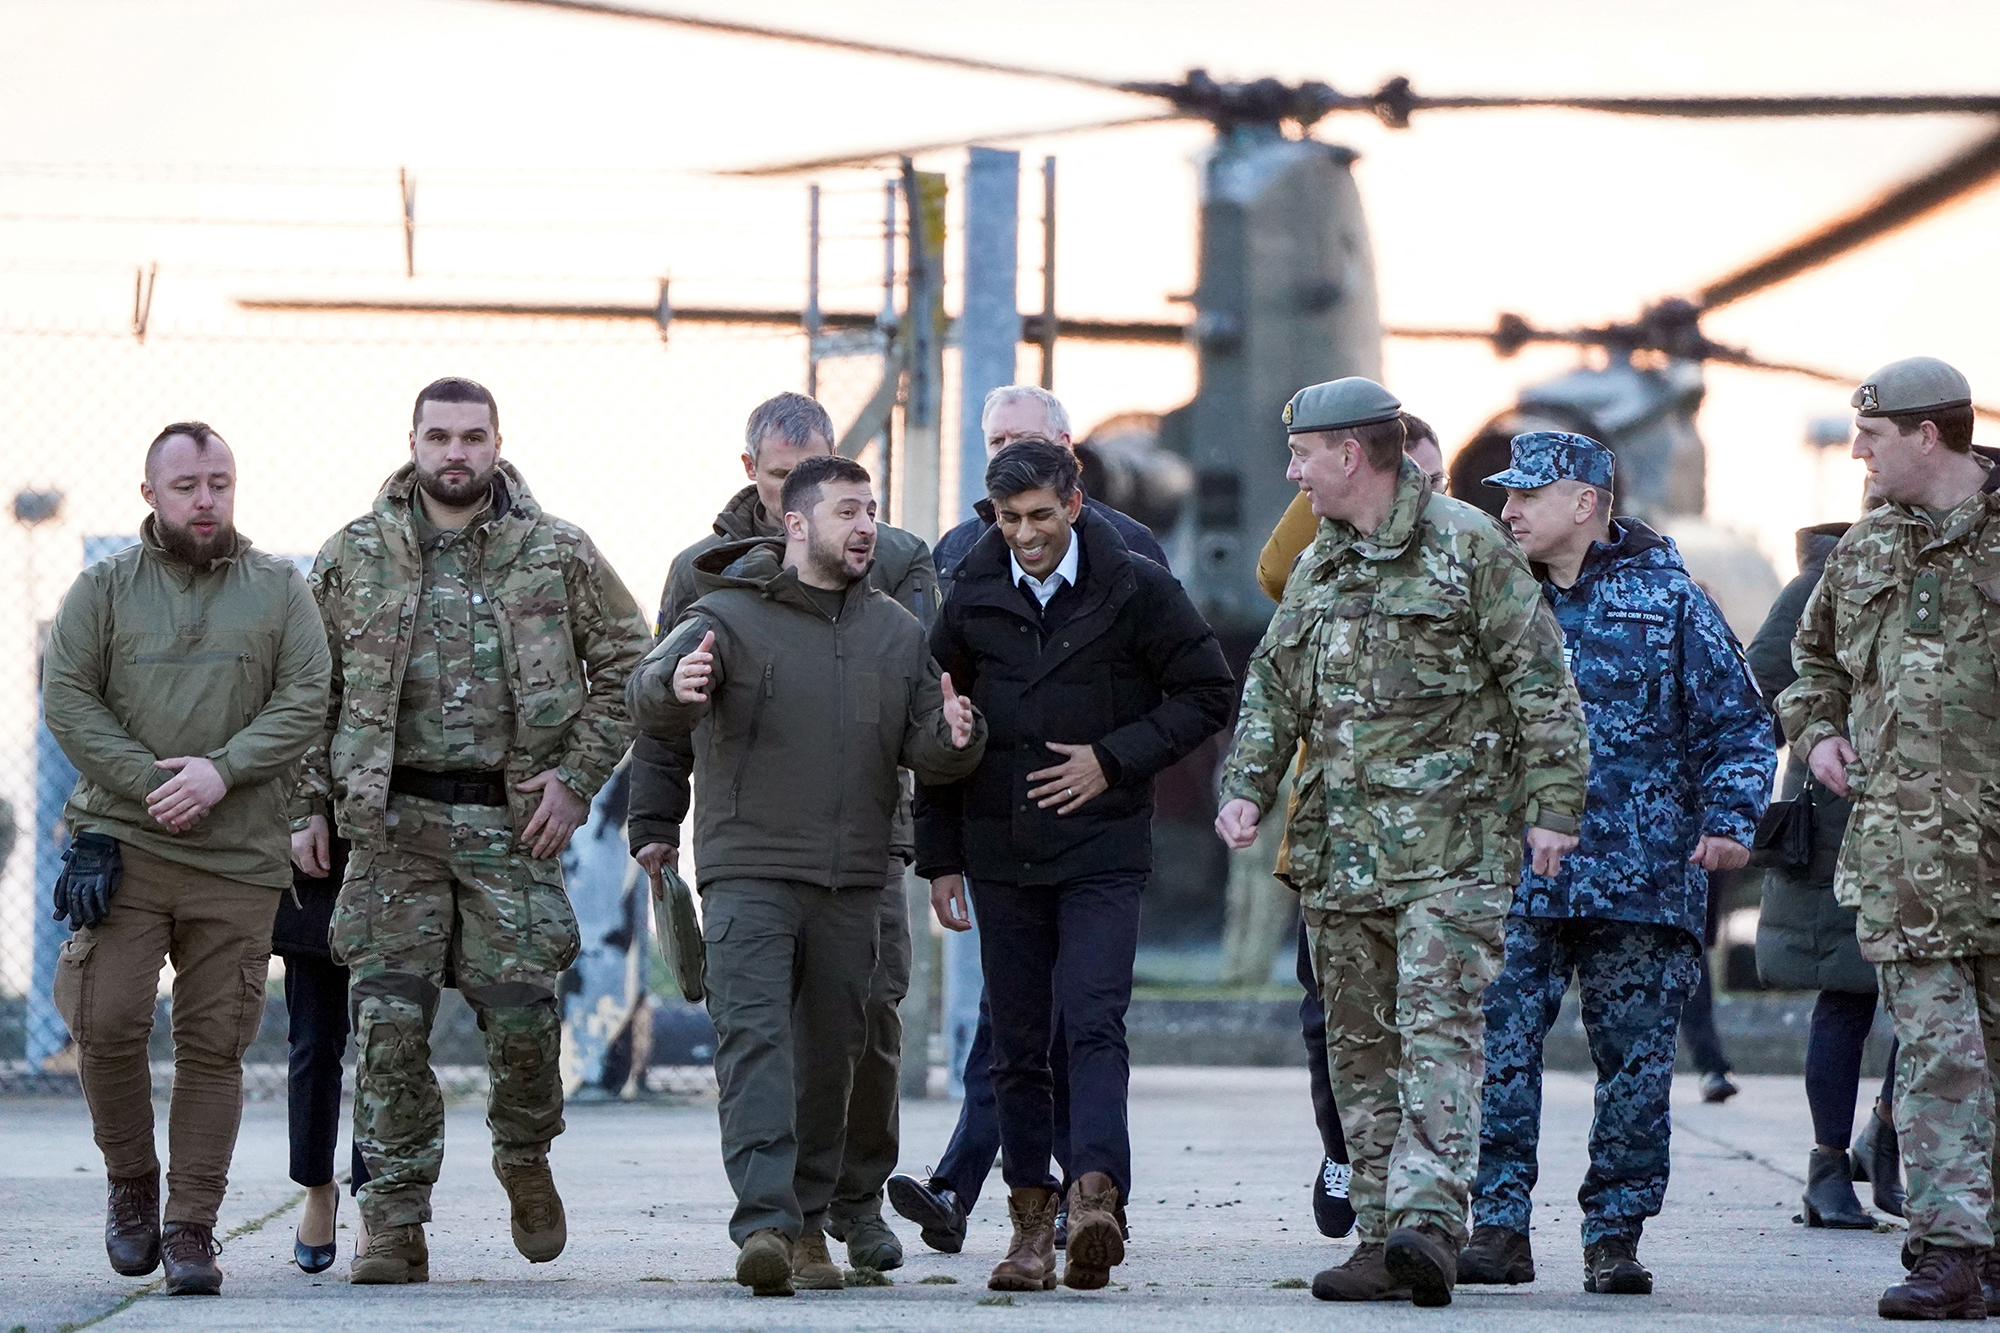 Zelensky and Sunak arrive to meet Ukrainian troops being trained to command Challenger 2 tanks at a military facility in Lulworth, England, on February 8.